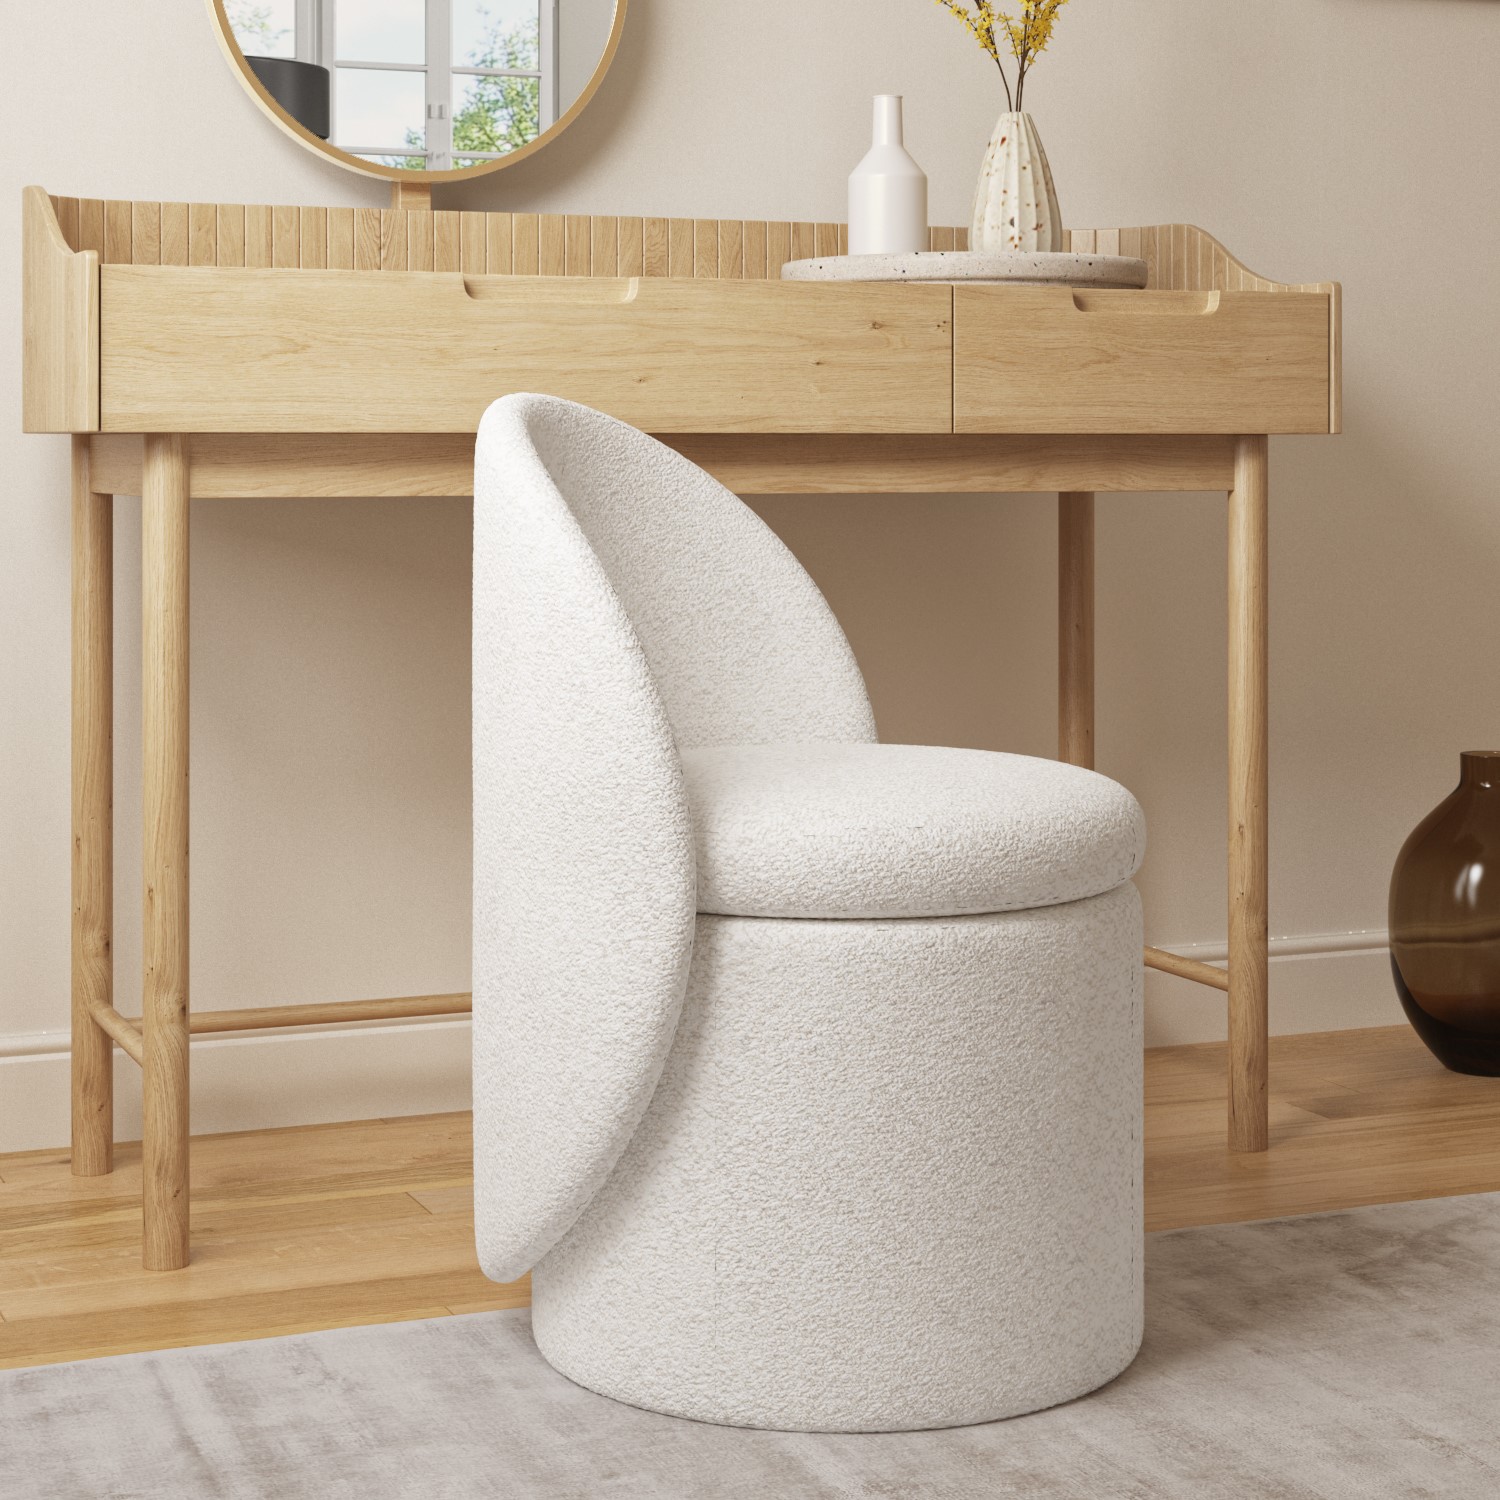 50 Beautiful Vanity Chairs & Stools To Add Elegance To Your Dressing Space  | Dressing table with chair, Floor protectors for chairs, Vanity chair